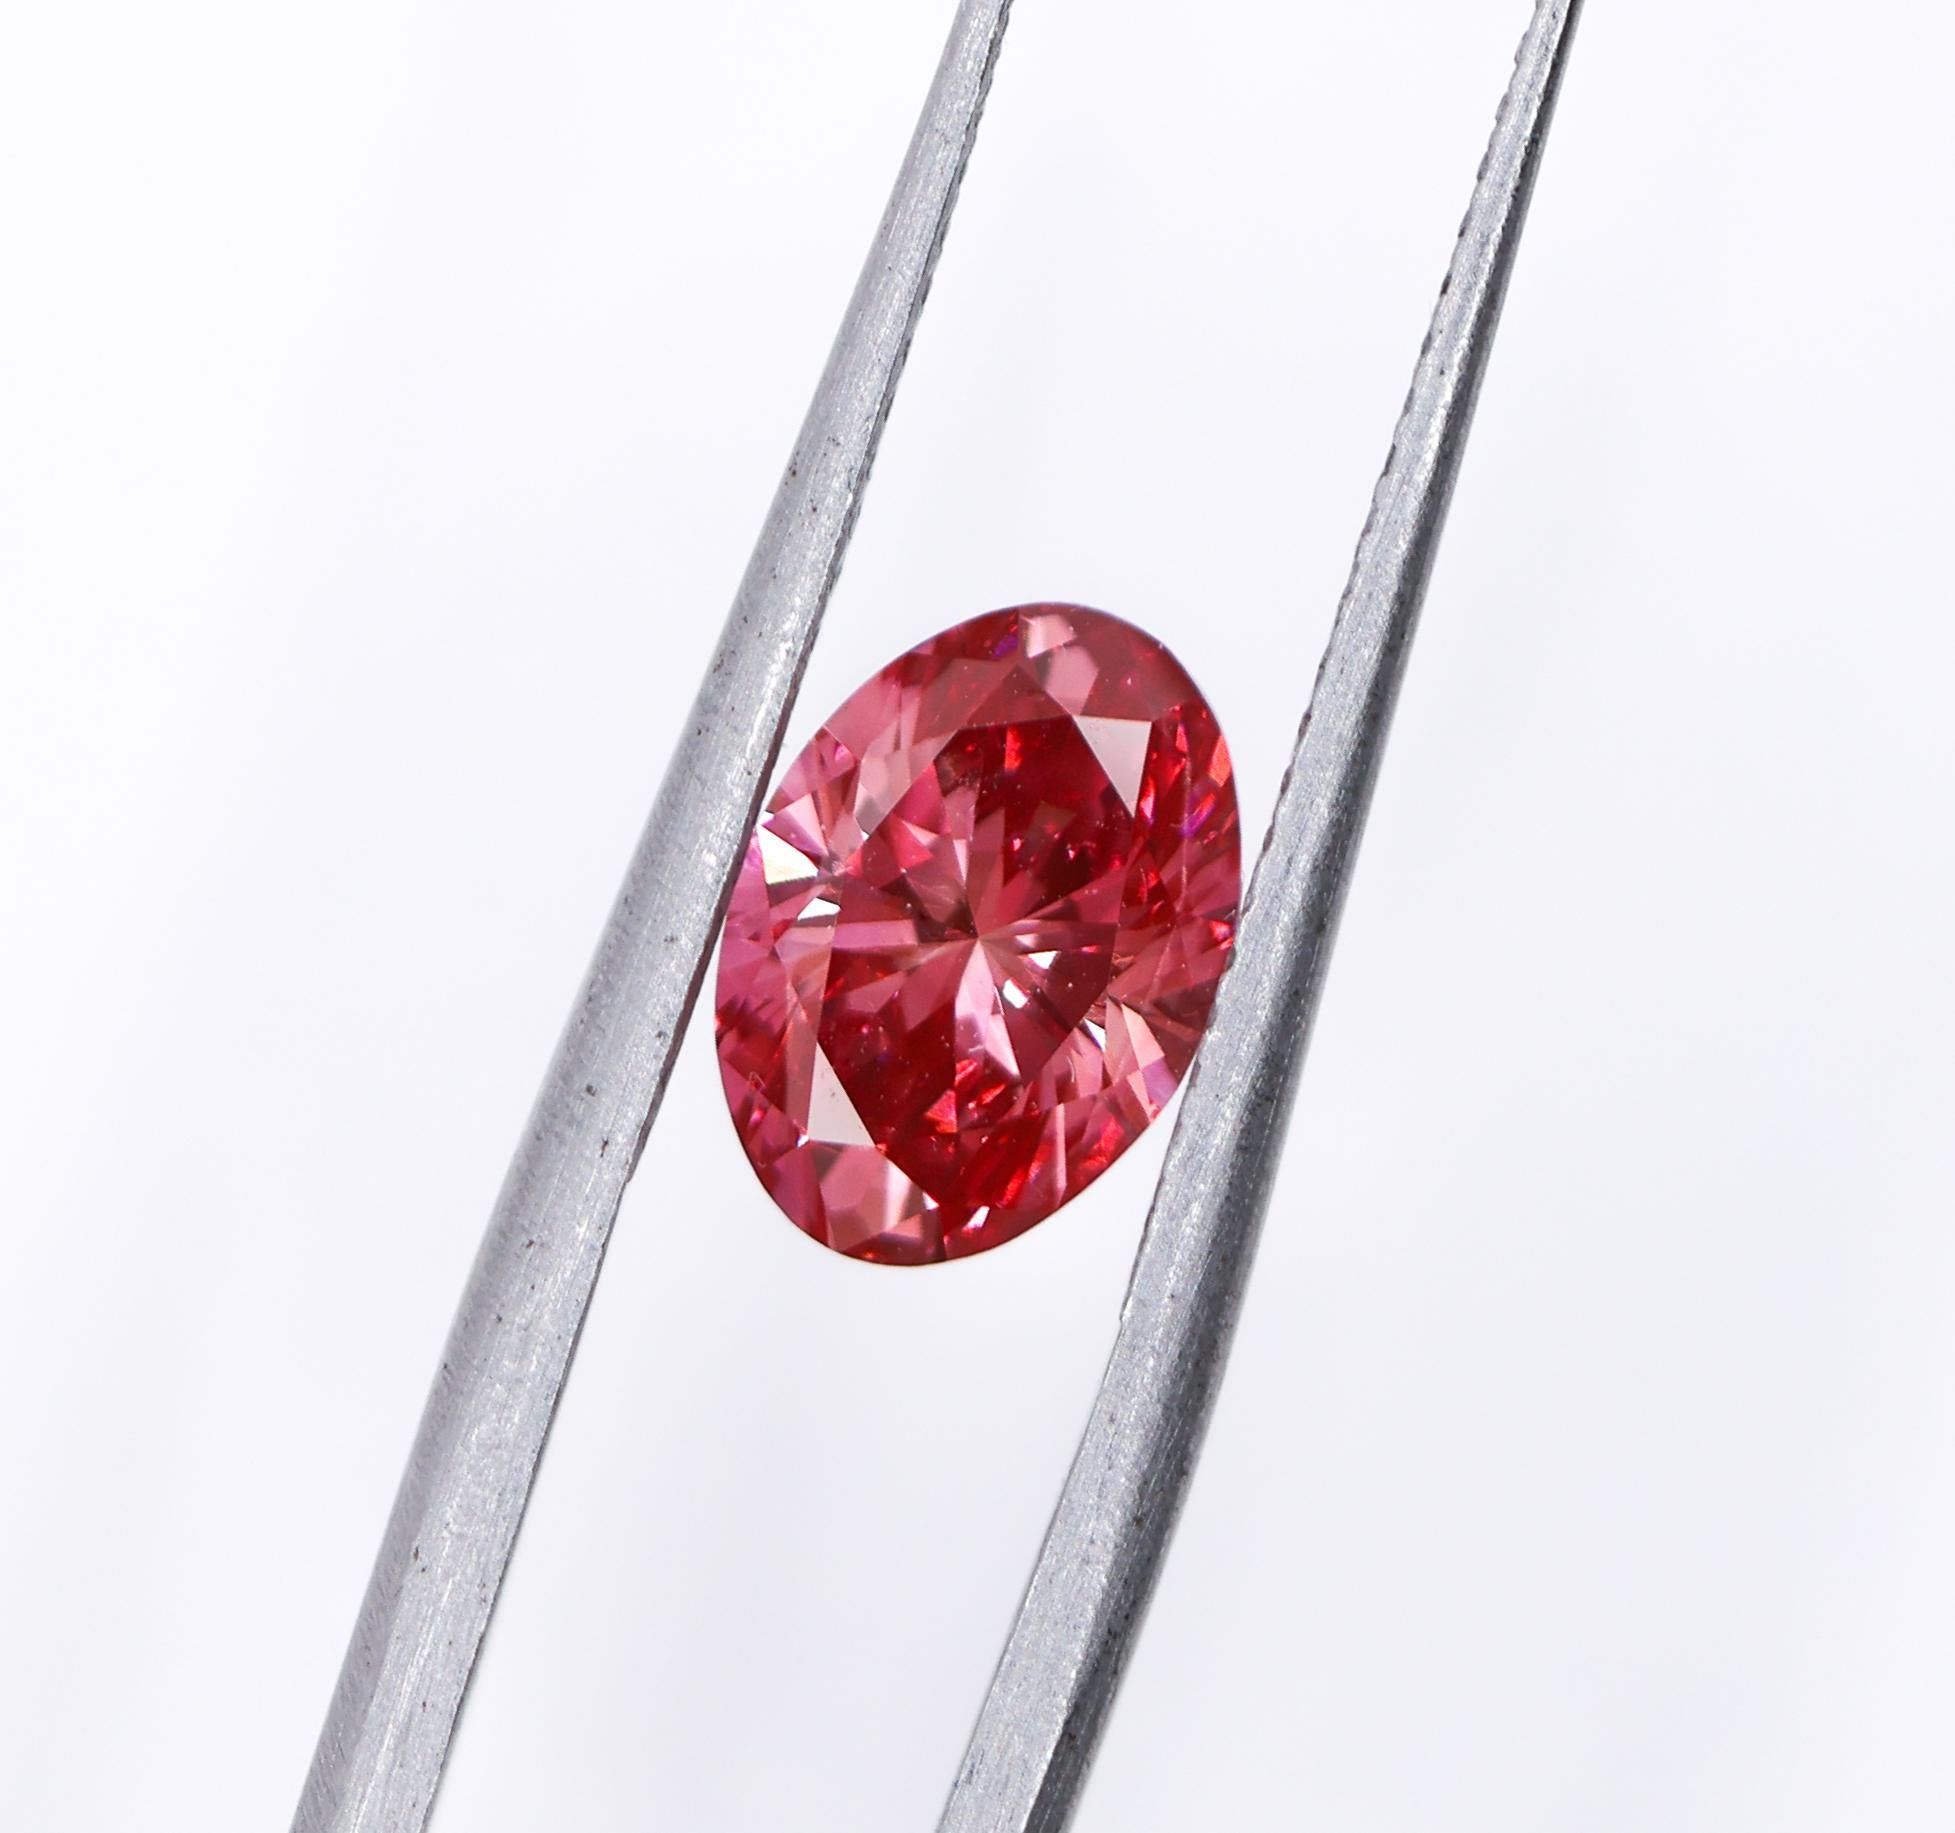 We are thrilled to bring you this absolutely gorgeous pink natural earth mined diamond! This diamond is HPHT treated, giving it a stunning Fancy Vivid Pink color. A fabulous size for an engagement ring or statement piece that is sure to turn heads.